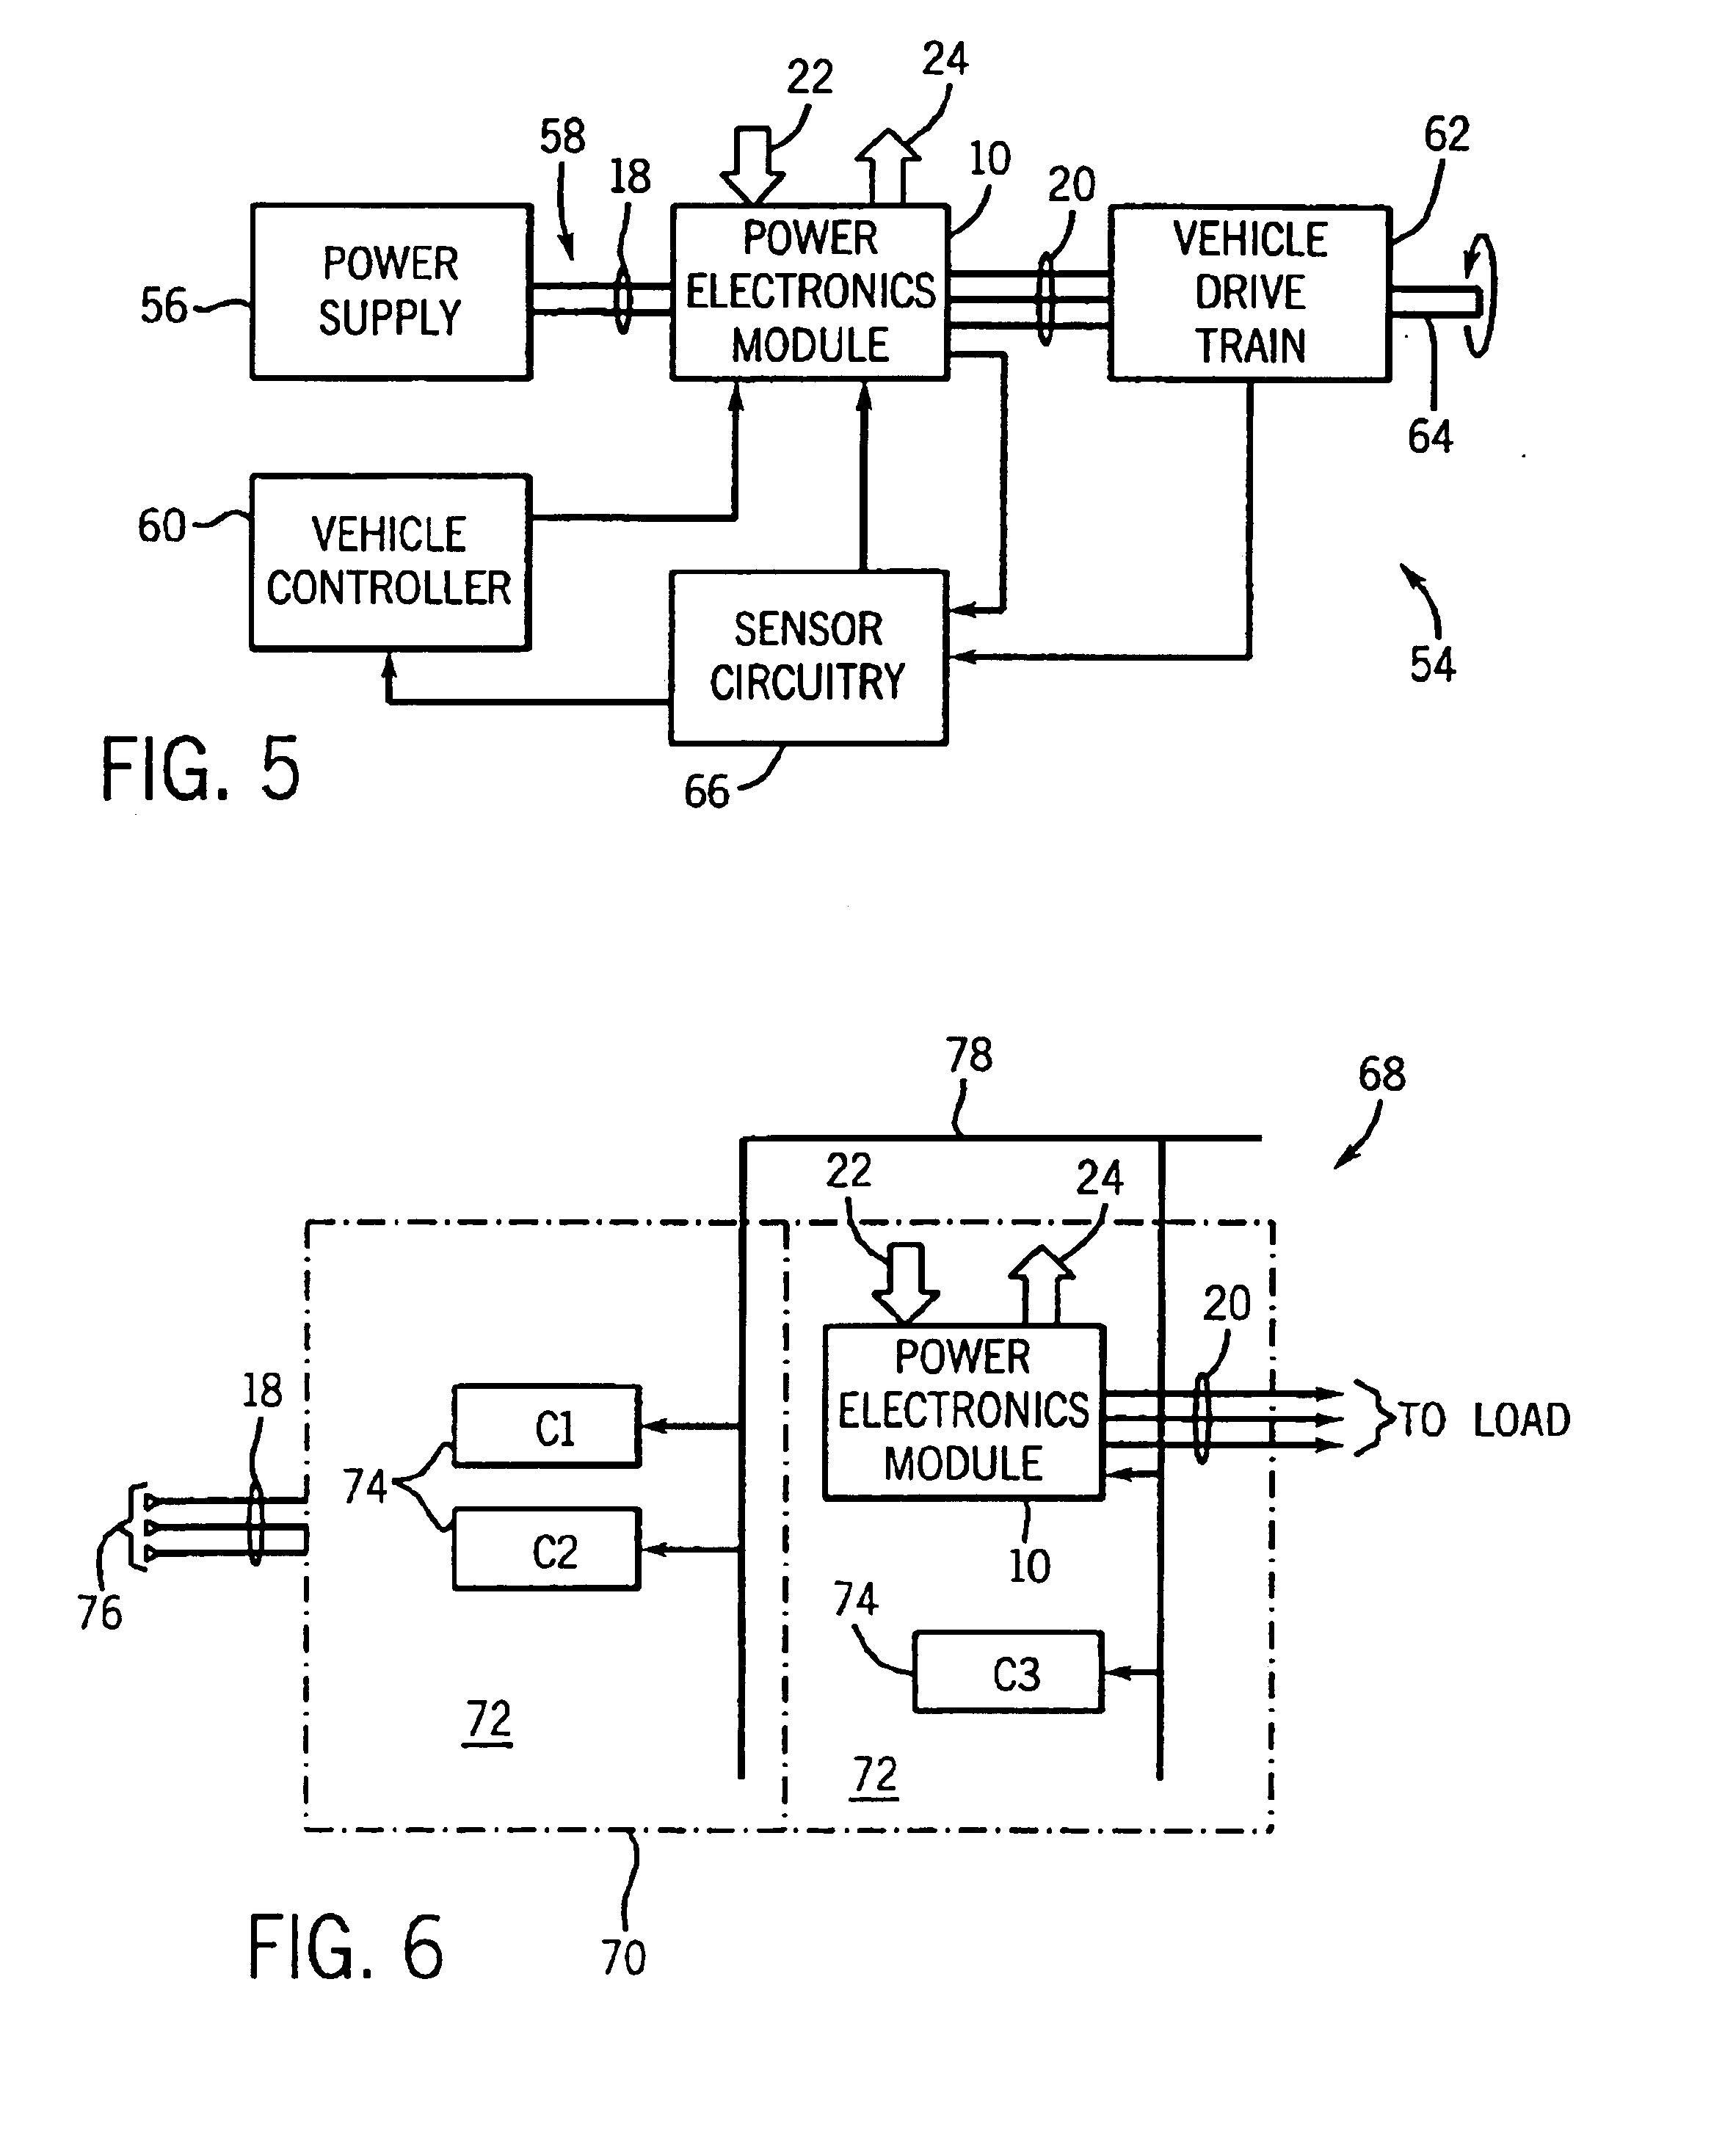 Cooled electrical terminal assembly and device incorporating same